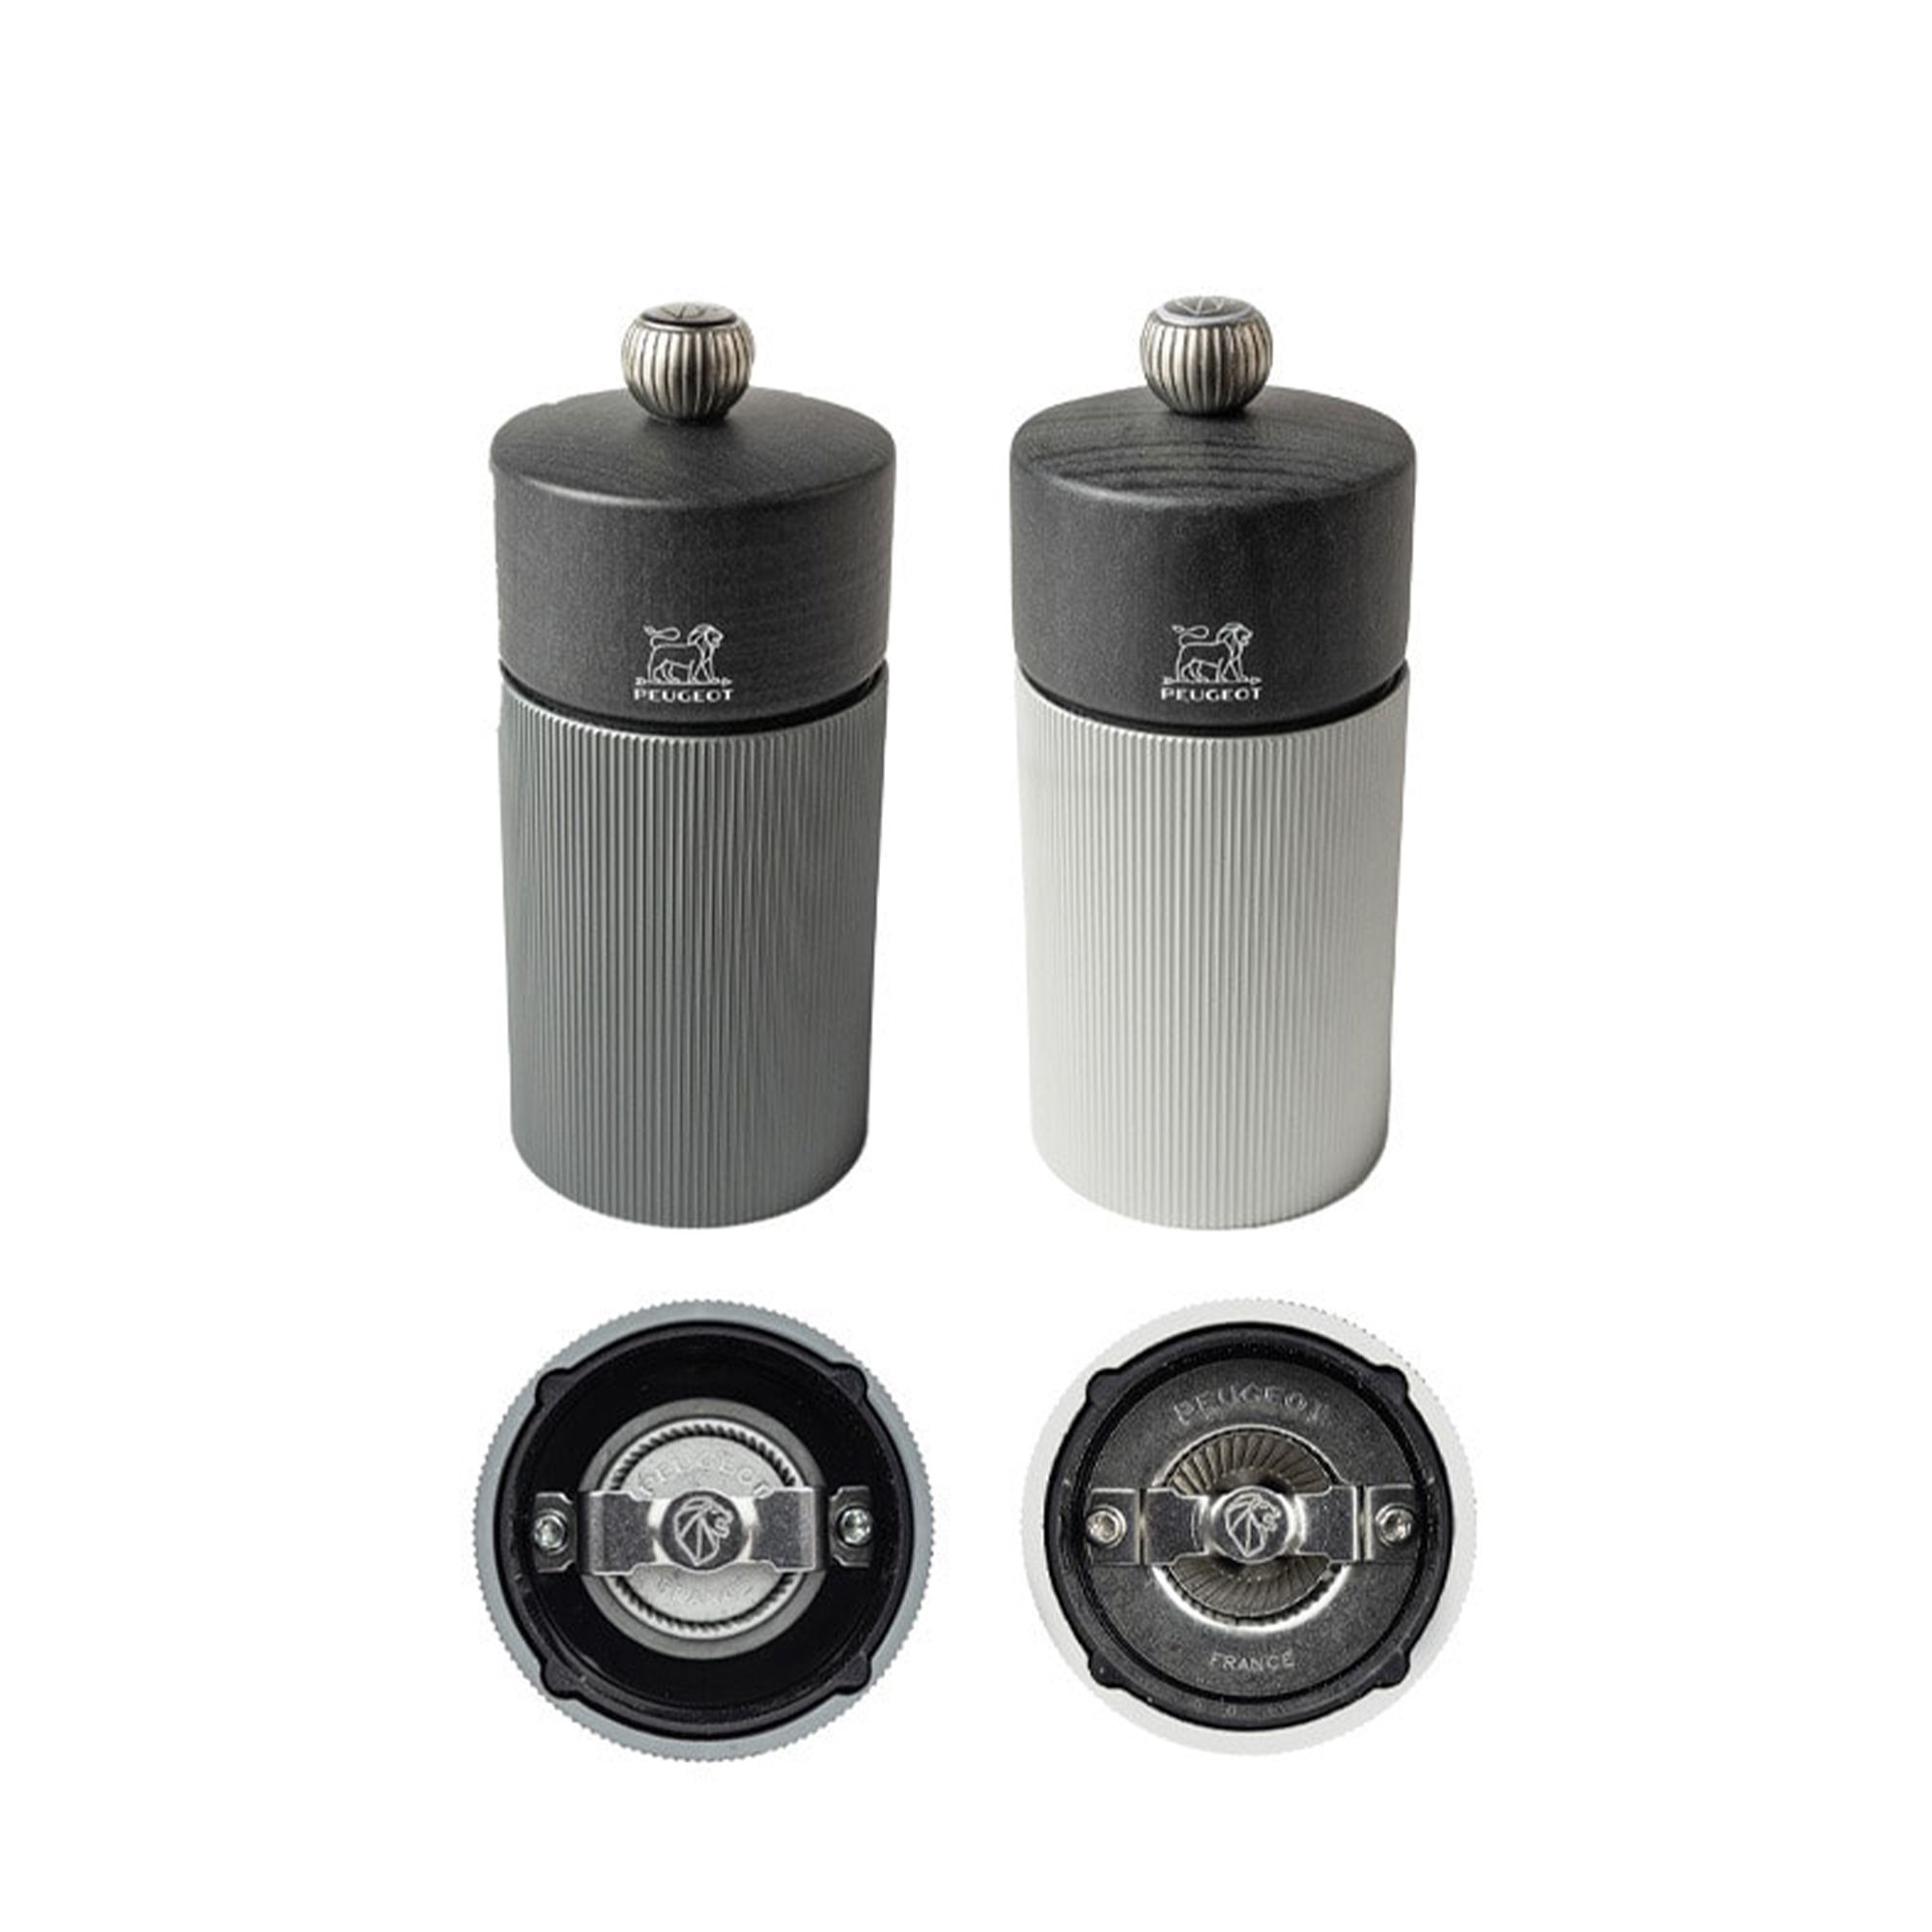 PSP Peugeot - Pepper and salt mill duo